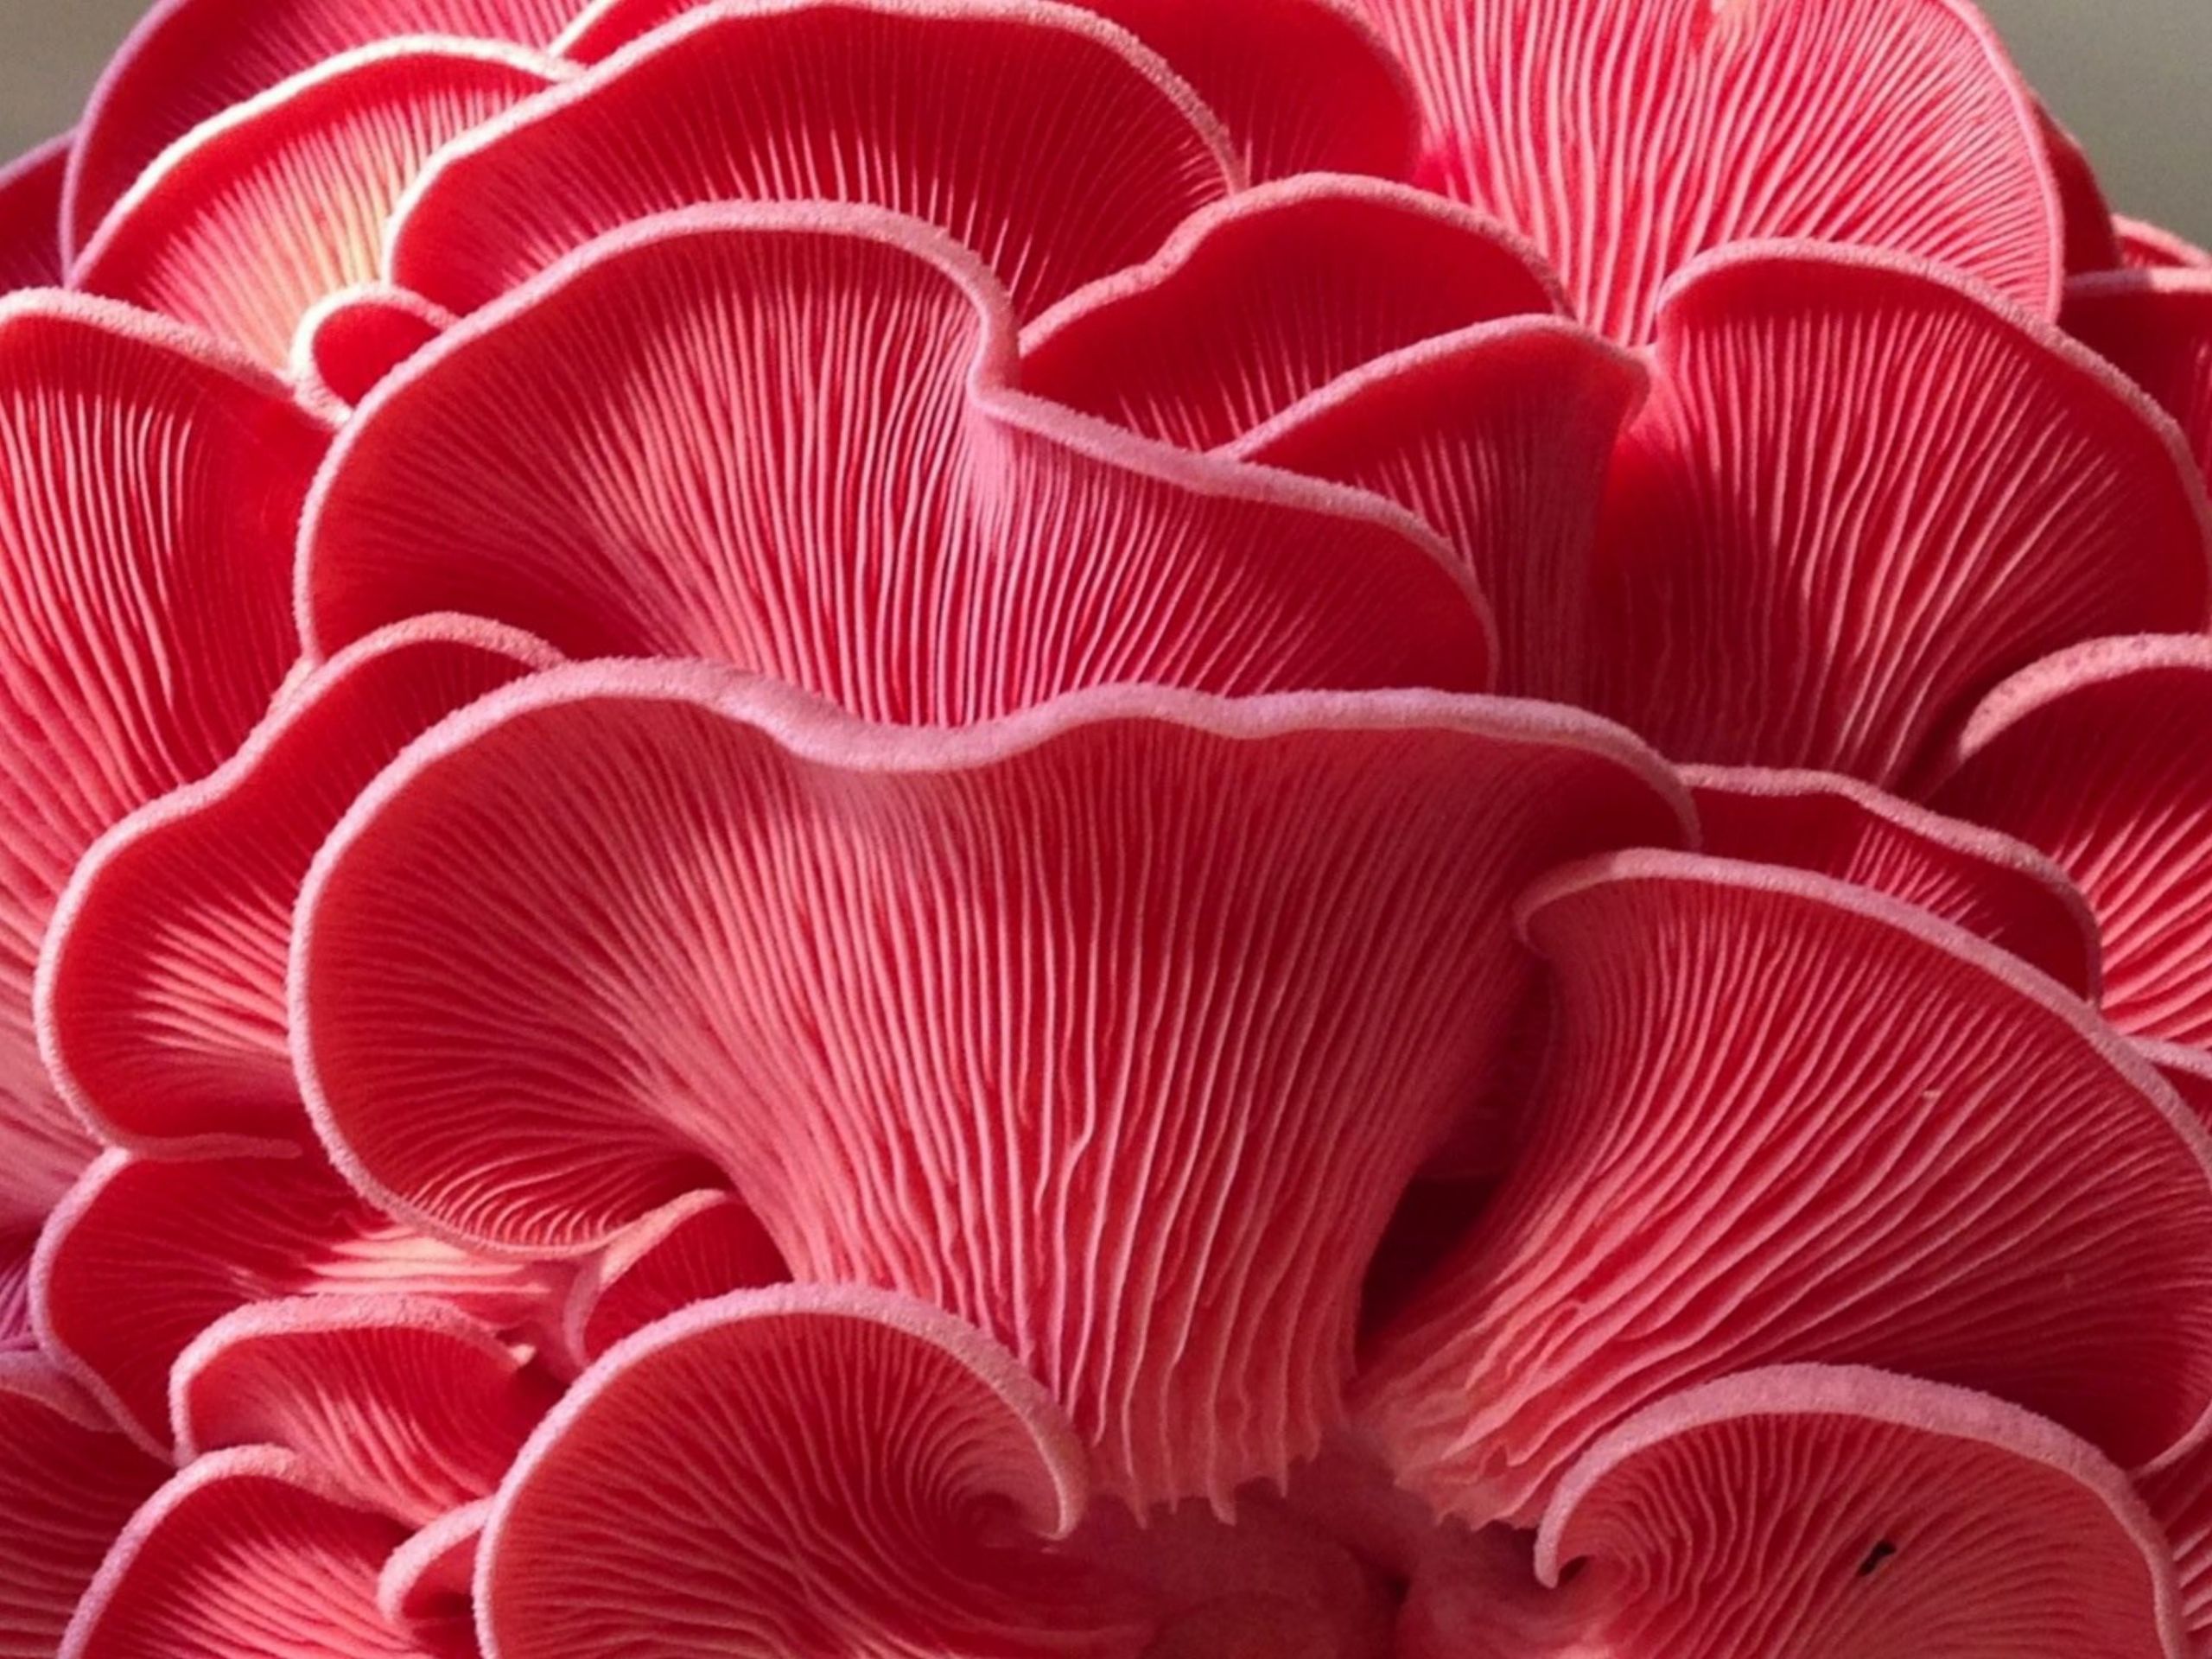 Pink Oyster Mushrooms
 Pink Oyster